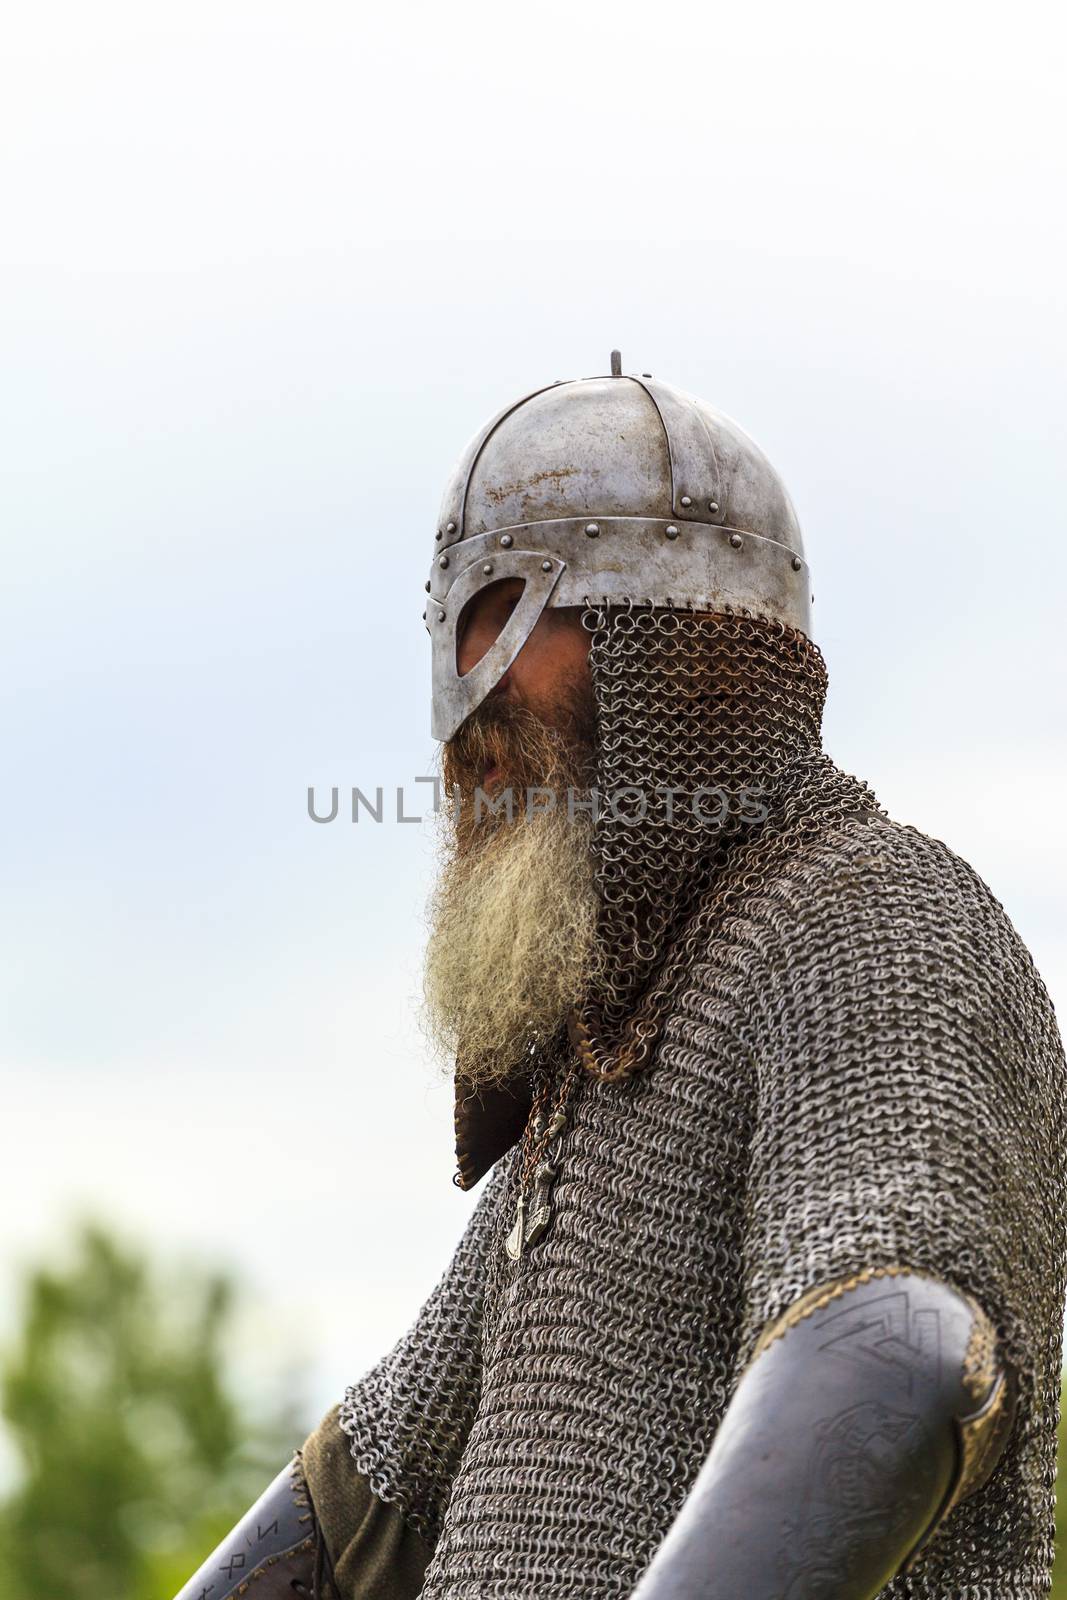 CALGARY CANADA JUN 13 2015: The Military Museum organized "Summer Skirmish" event where an unidentified soldier is seen in a historical Reenactment Battle. Viking solder in action.